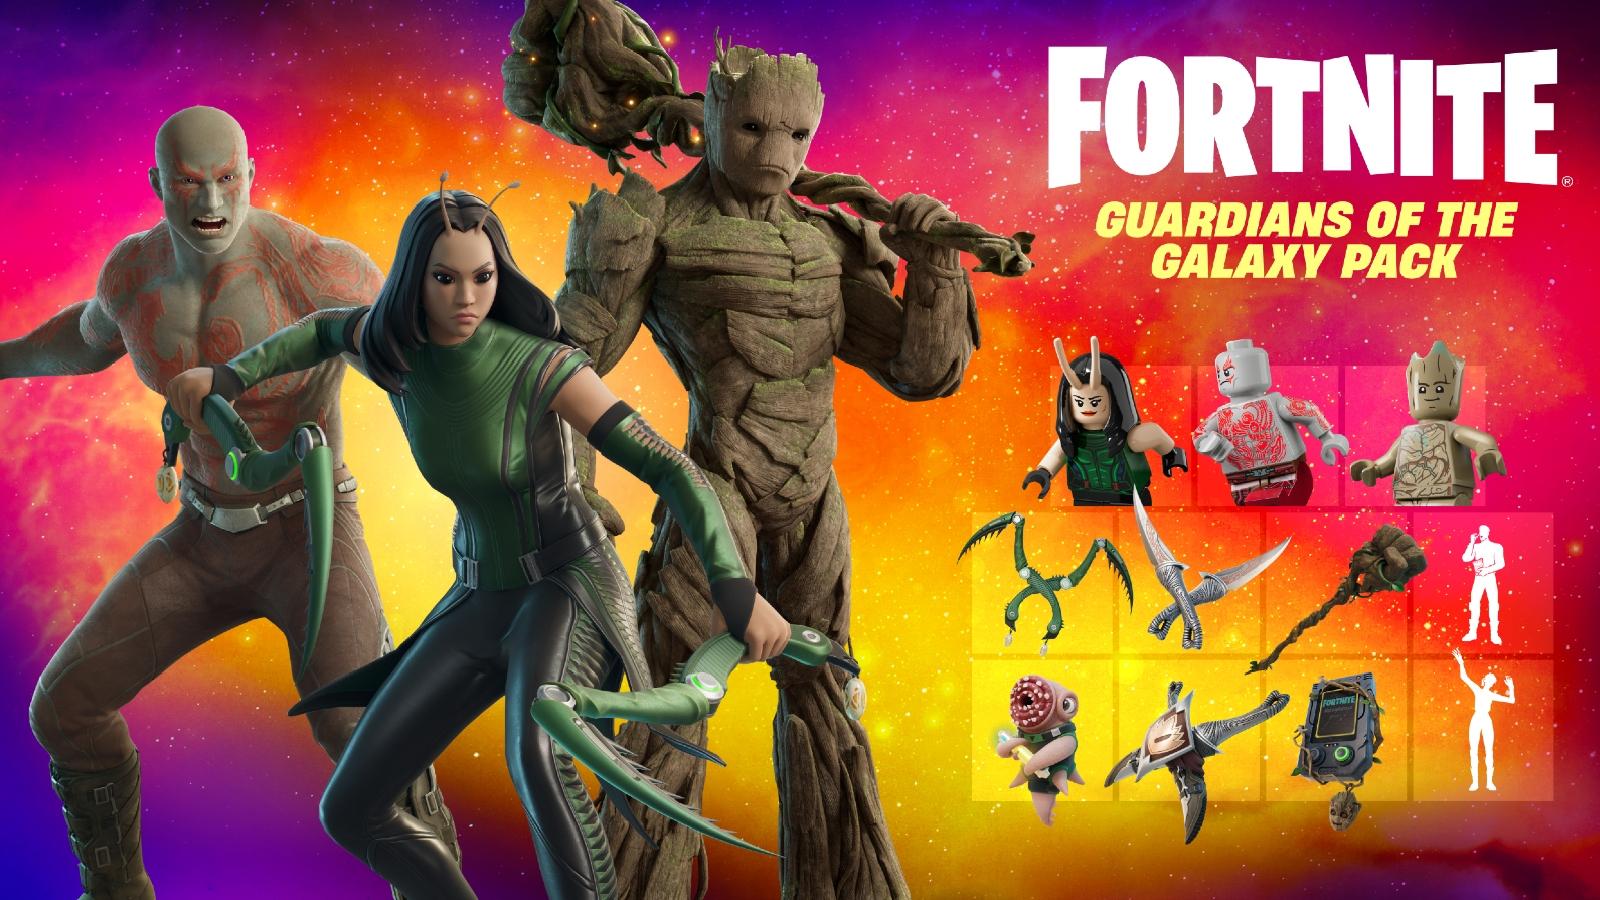 Fortnite Guardians of the Galaxy